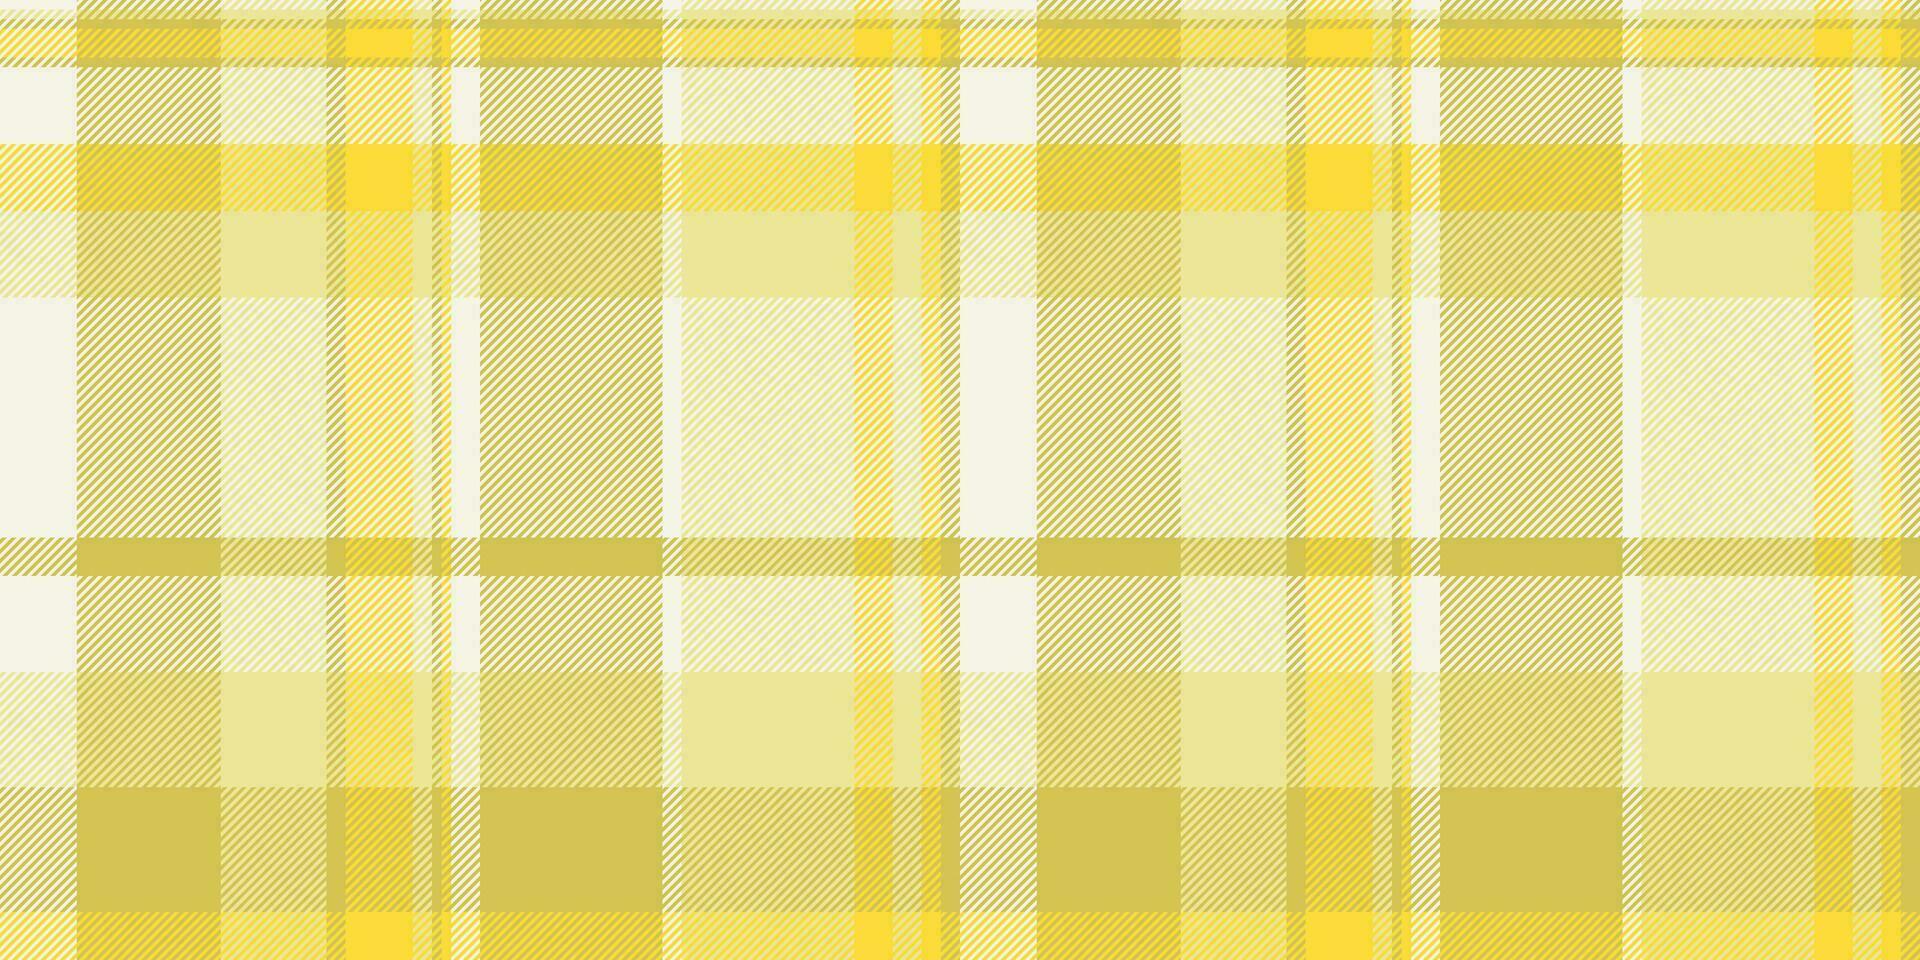 Doodle fabric check pattern, professional seamless tartan texture. Handsome plaid textile background vector in yellow and linen colors.